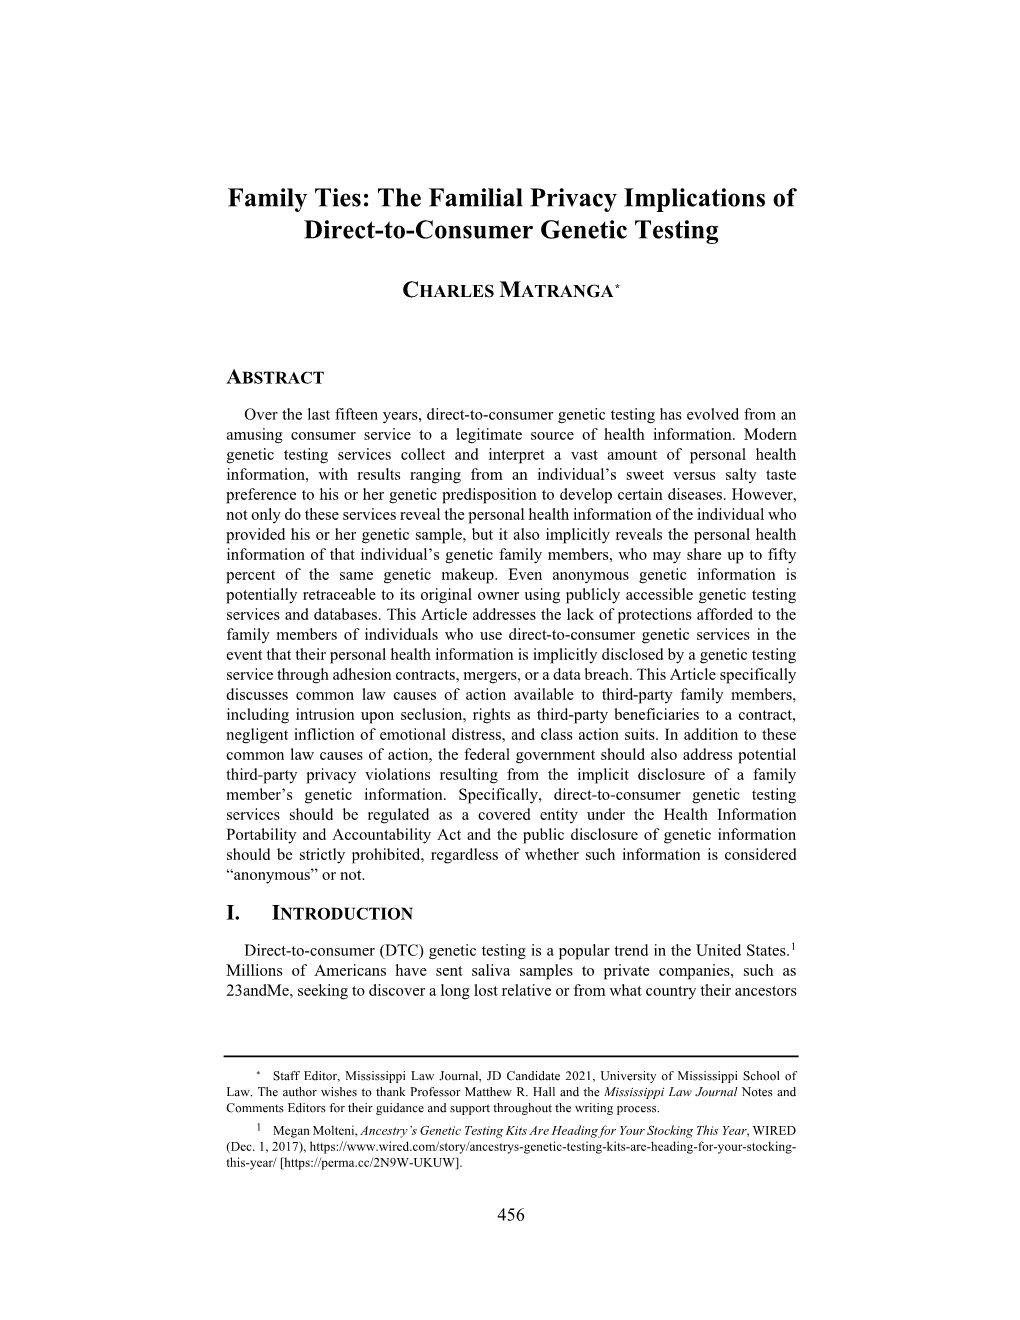 Family Ties: the Familial Privacy Implications of Direct-To-Consumer Genetic Testing